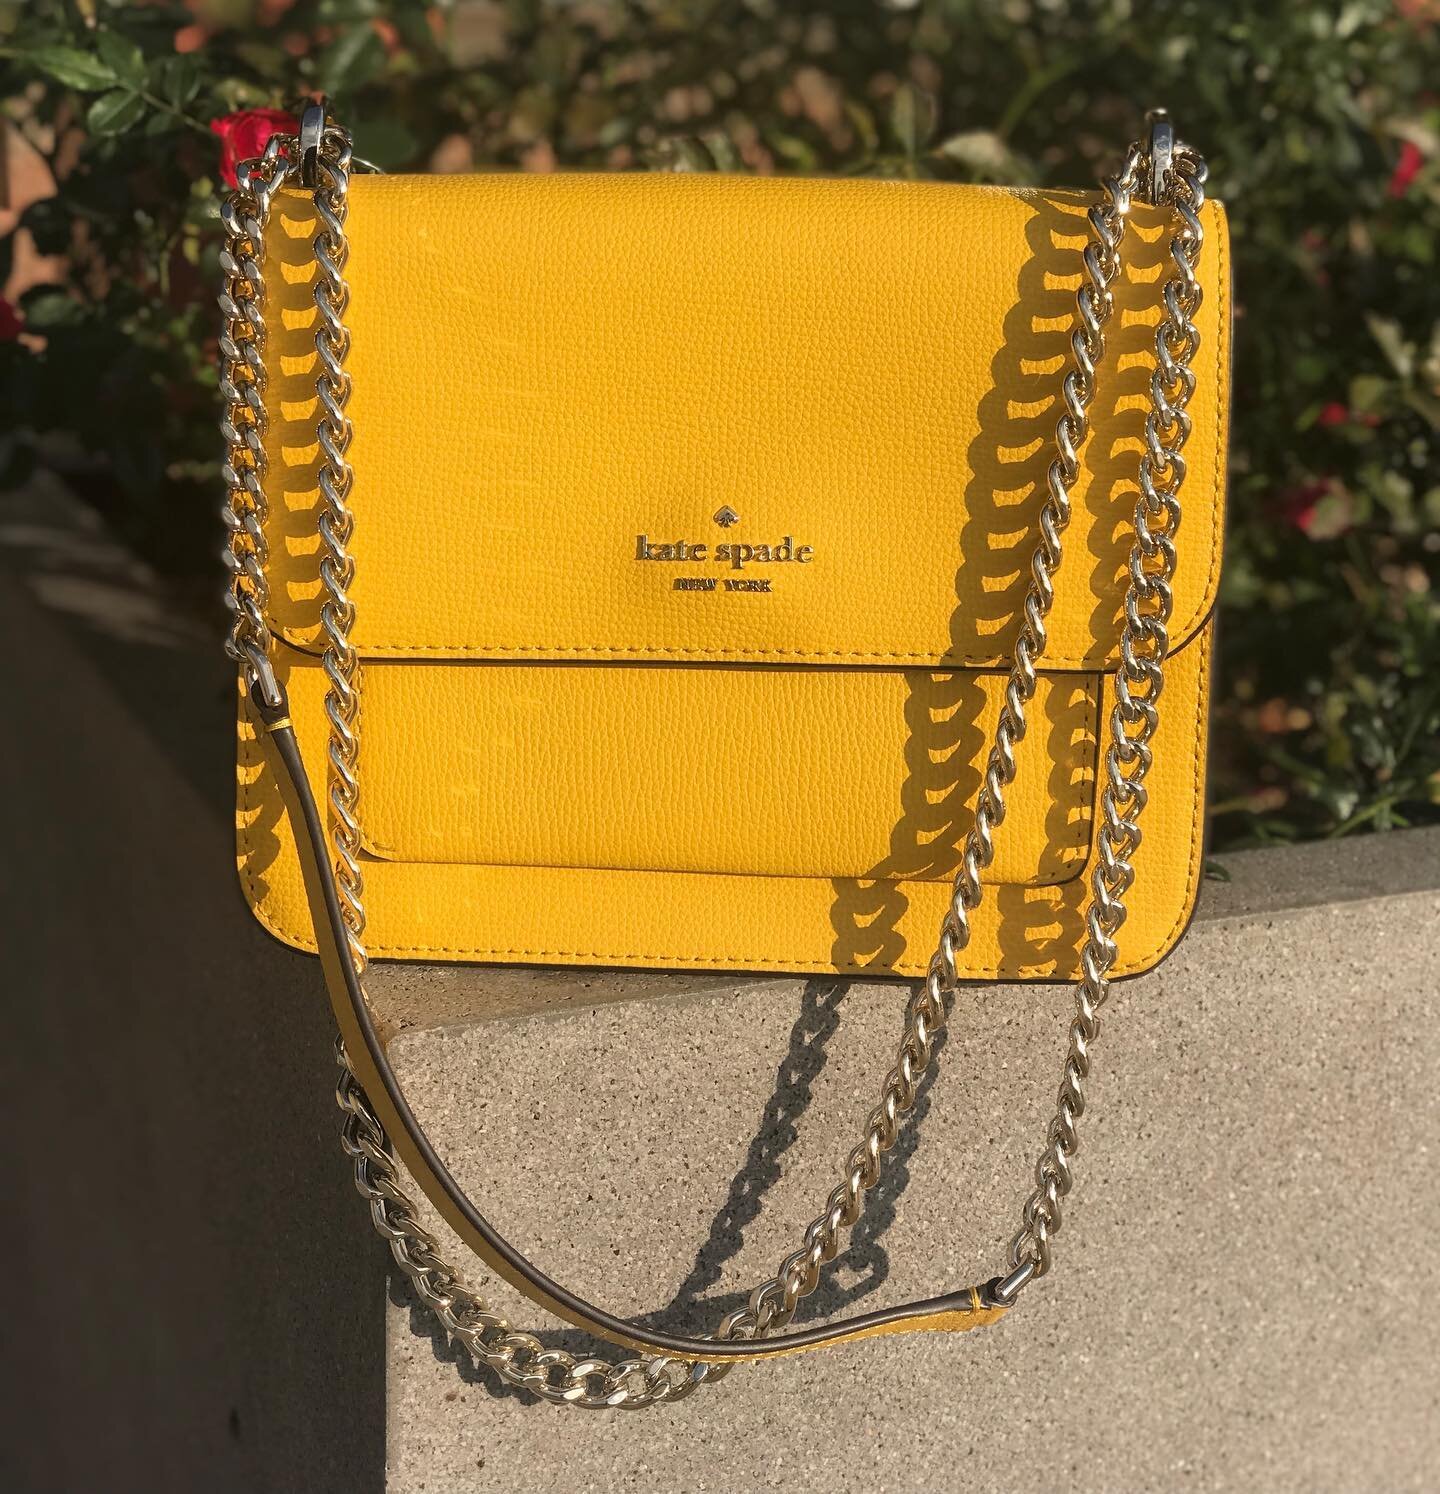 💛👜Yellow beauty! This crossbody with adjustable strap is perfect for the season! $140.95👜💛
 &bull;
For inquiries, please call or email us!
☎️ 267-807-1295 
📧snyder@greenestreet.com 
&bull;
@shopgreenestreet 
@greenestreetsynder is not affiliated